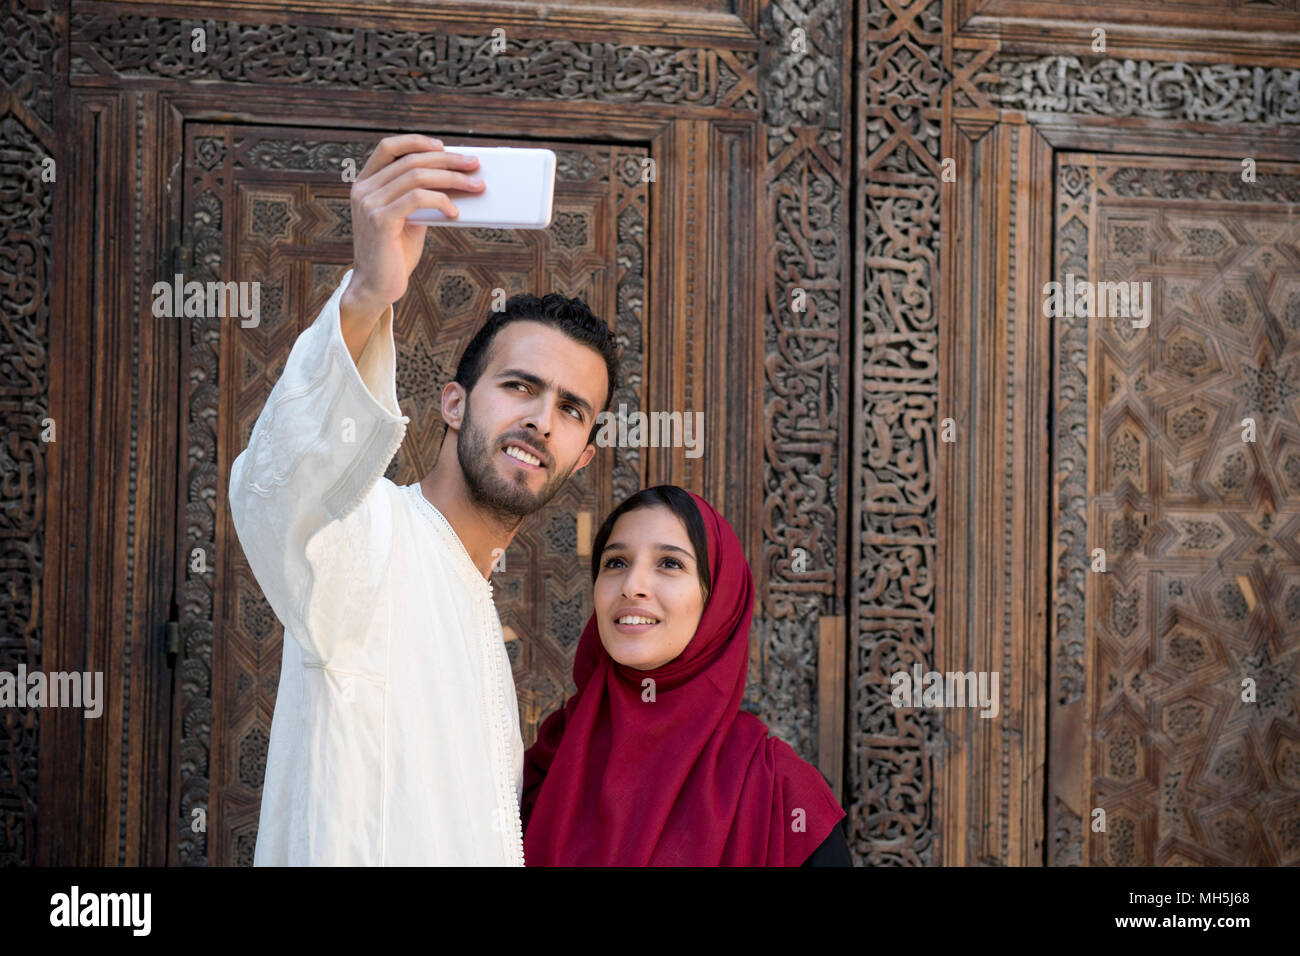 Young Muslim couple smiling and taking selfie with smart phone Stock Photo